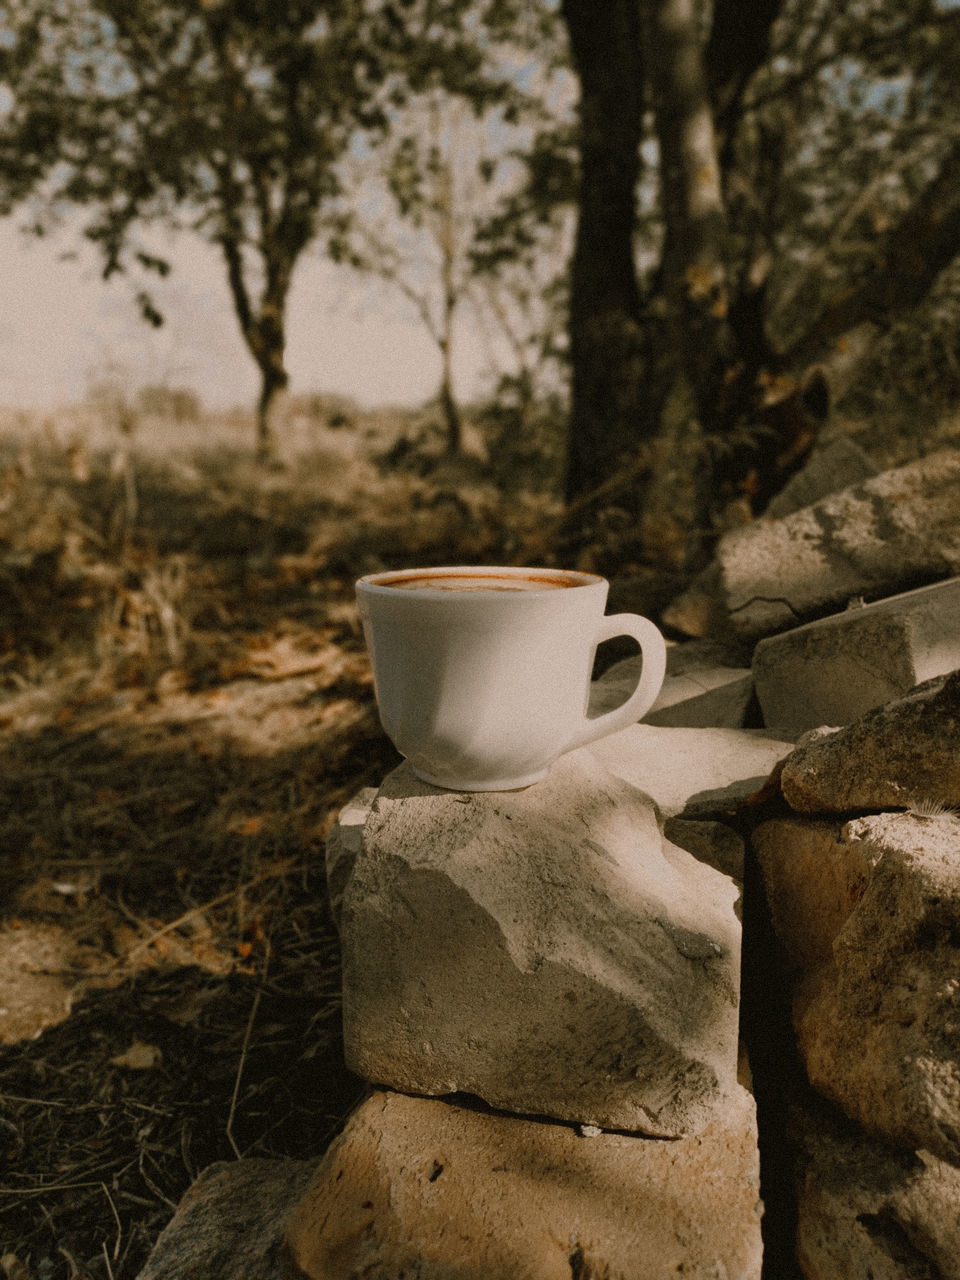 COFFEE CUP ON ROCK BY TREES